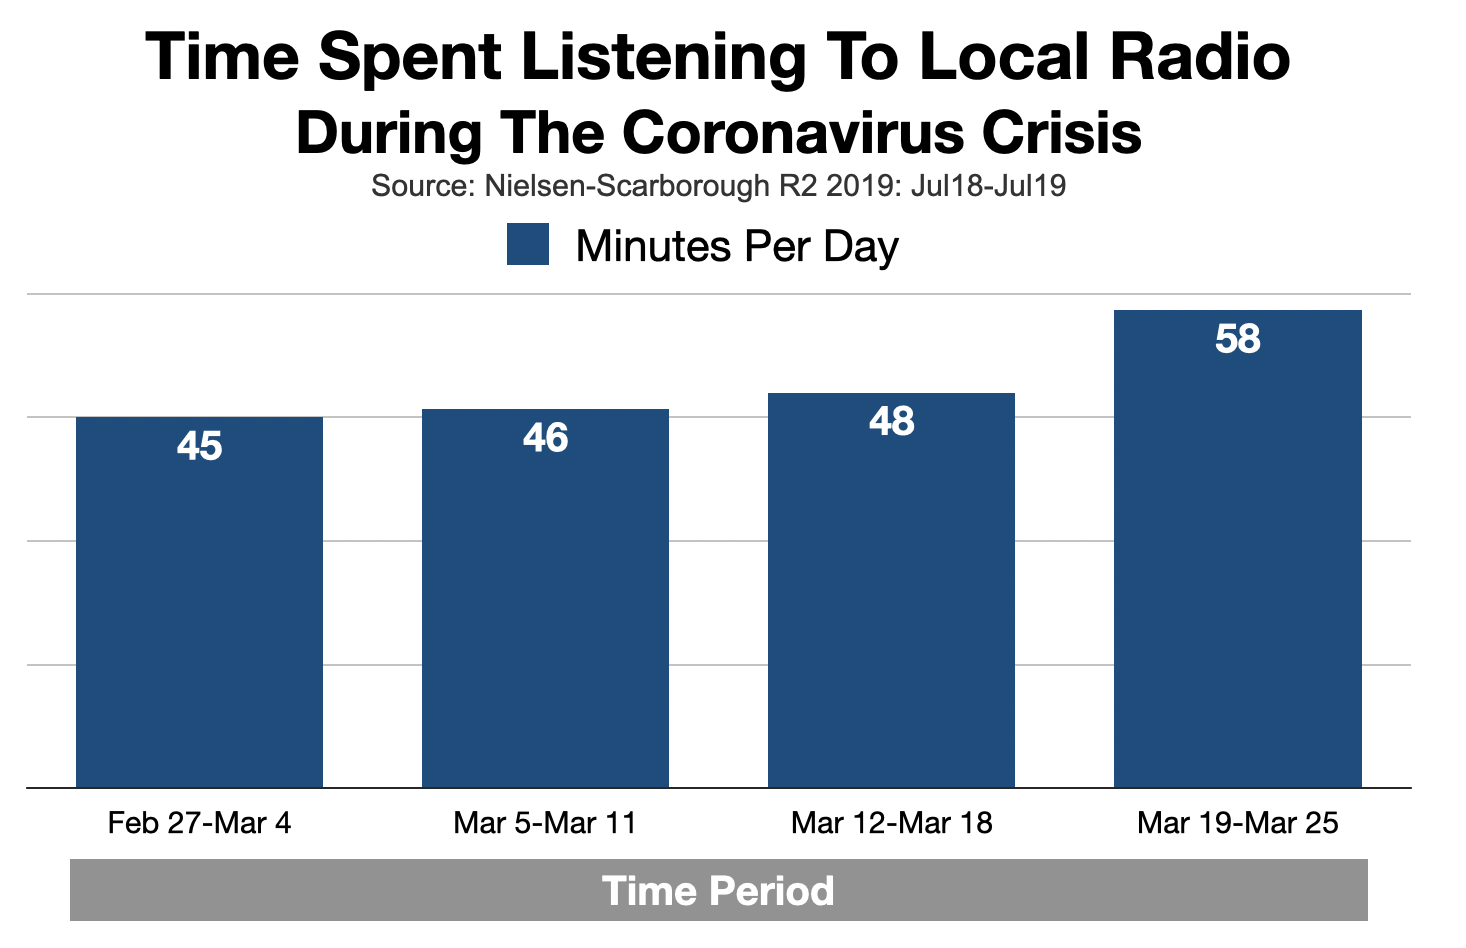 Advertise In Tampa: Time Spent Listening To Radio